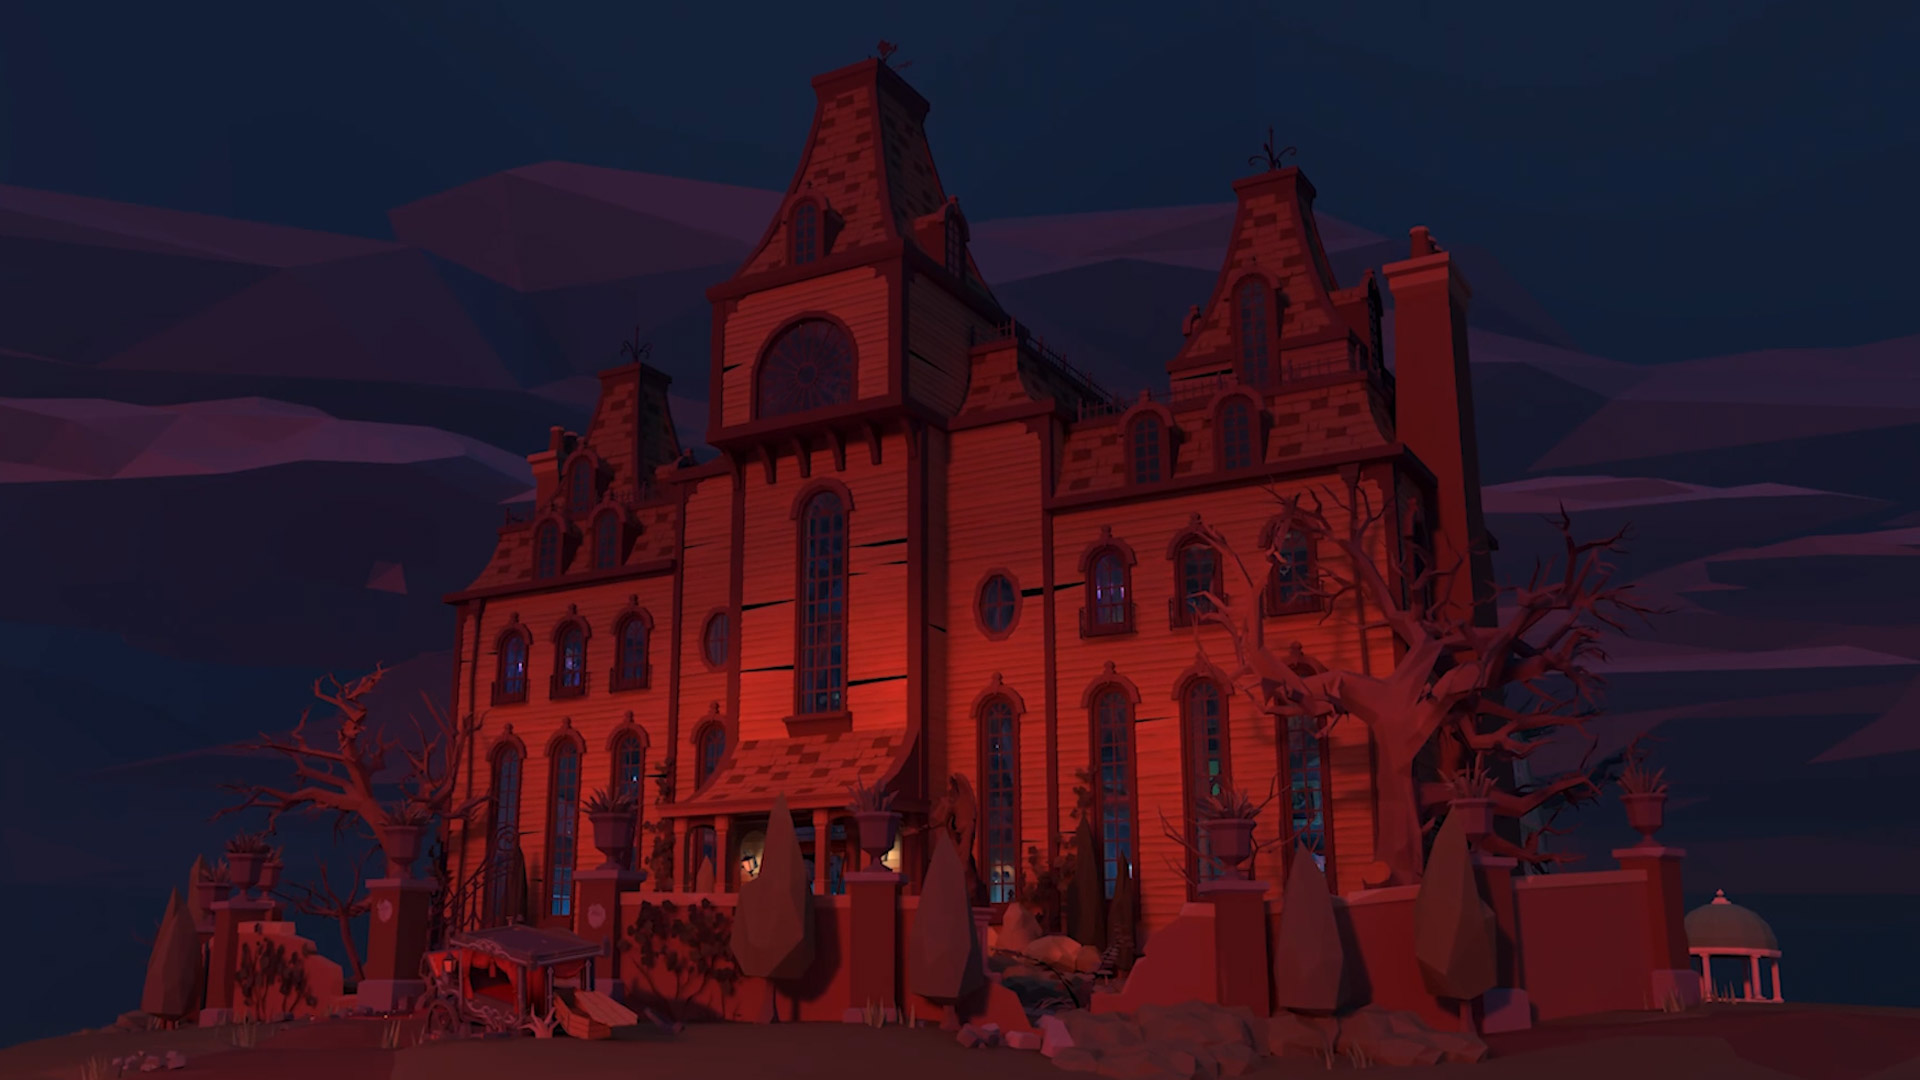 VR’s Favorite Mini Golf Game Gets Spooky with New Haunted Course